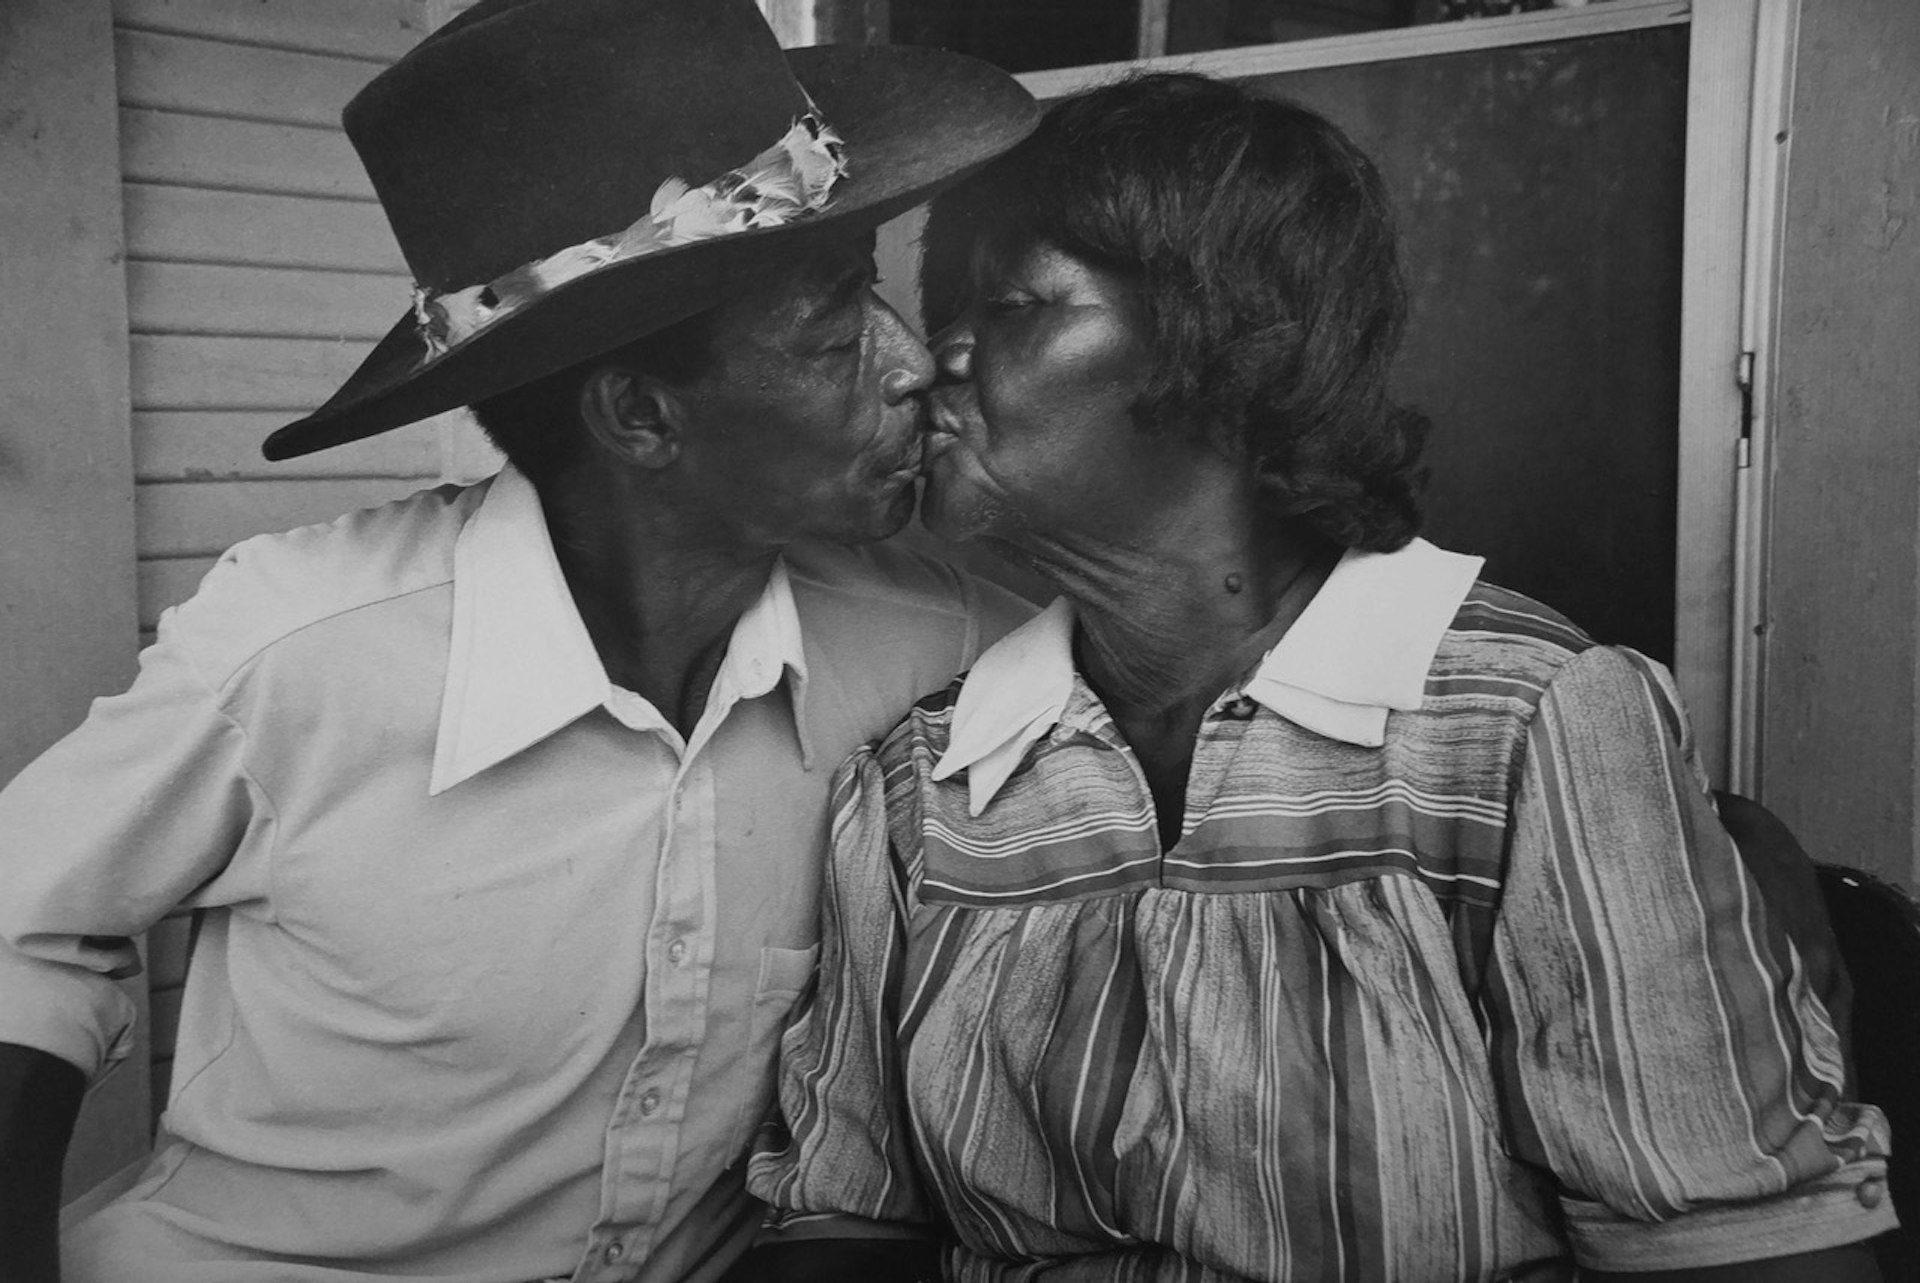 Tender portraits of Black life in Houston’s Fourth Ward